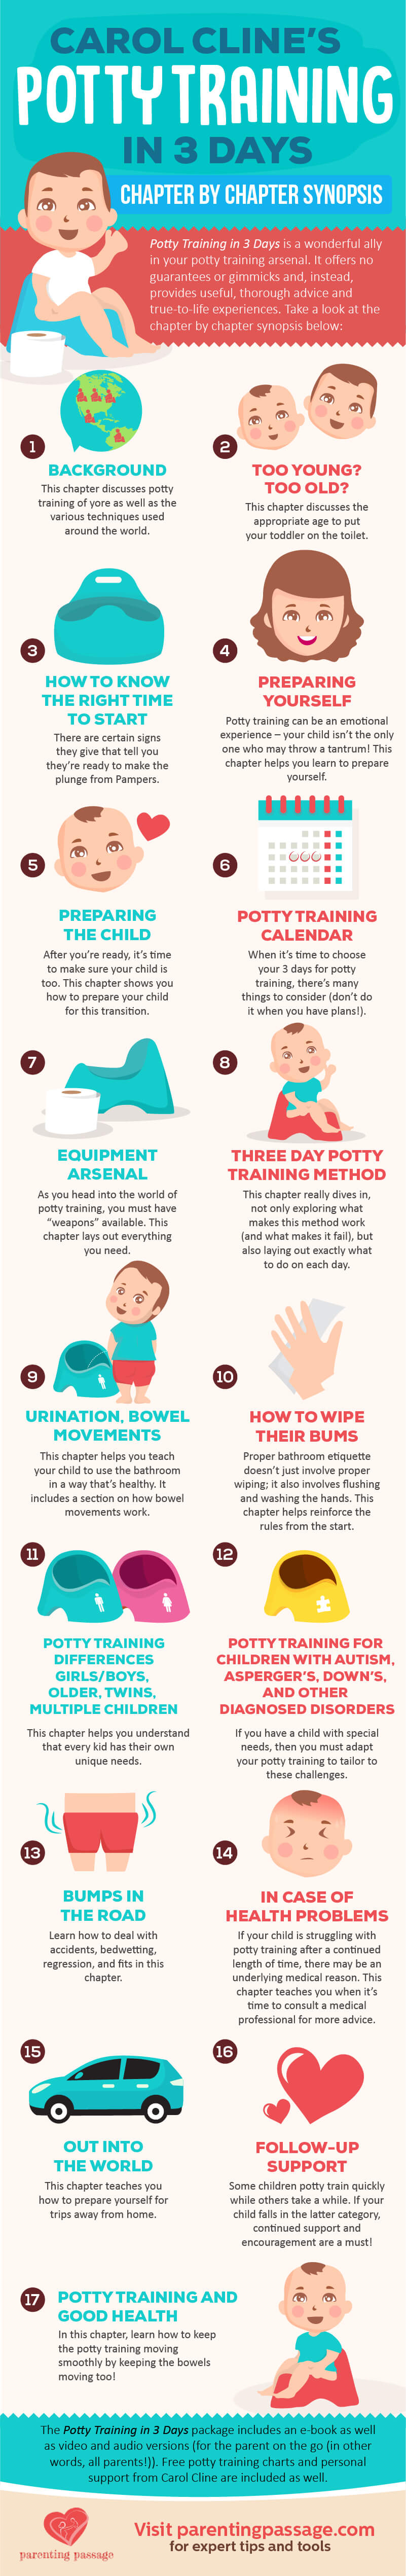 Carol-Cline-Potty-Training-in-3-Days-Synopsis-infographic